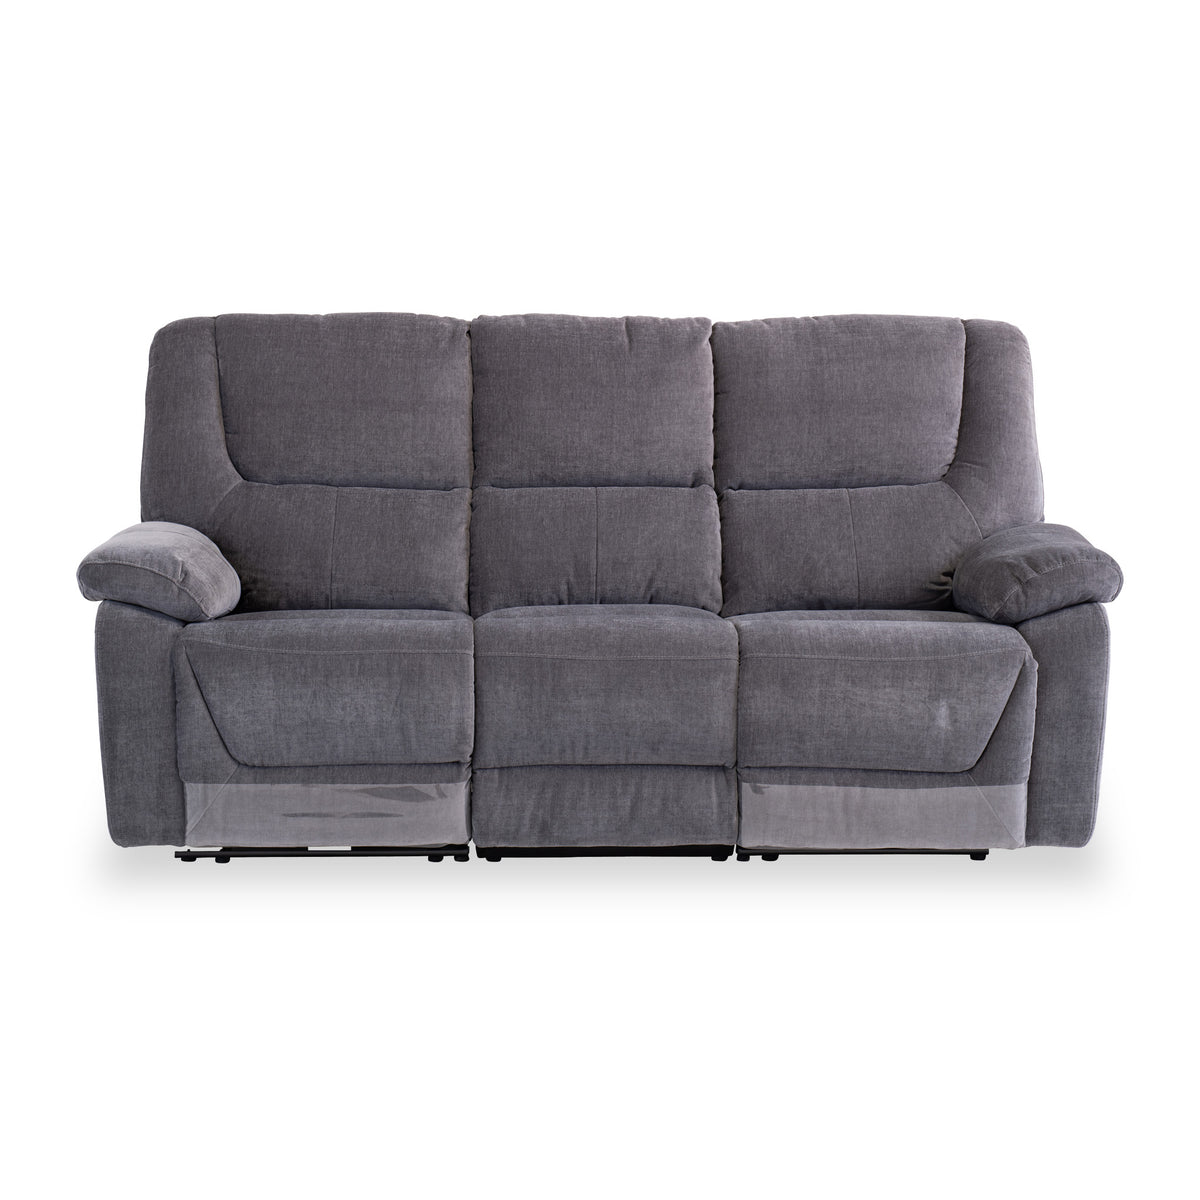 Barlow Grey Fabric Electric Reclining 3 Seater Sofa from Roseland Furniture